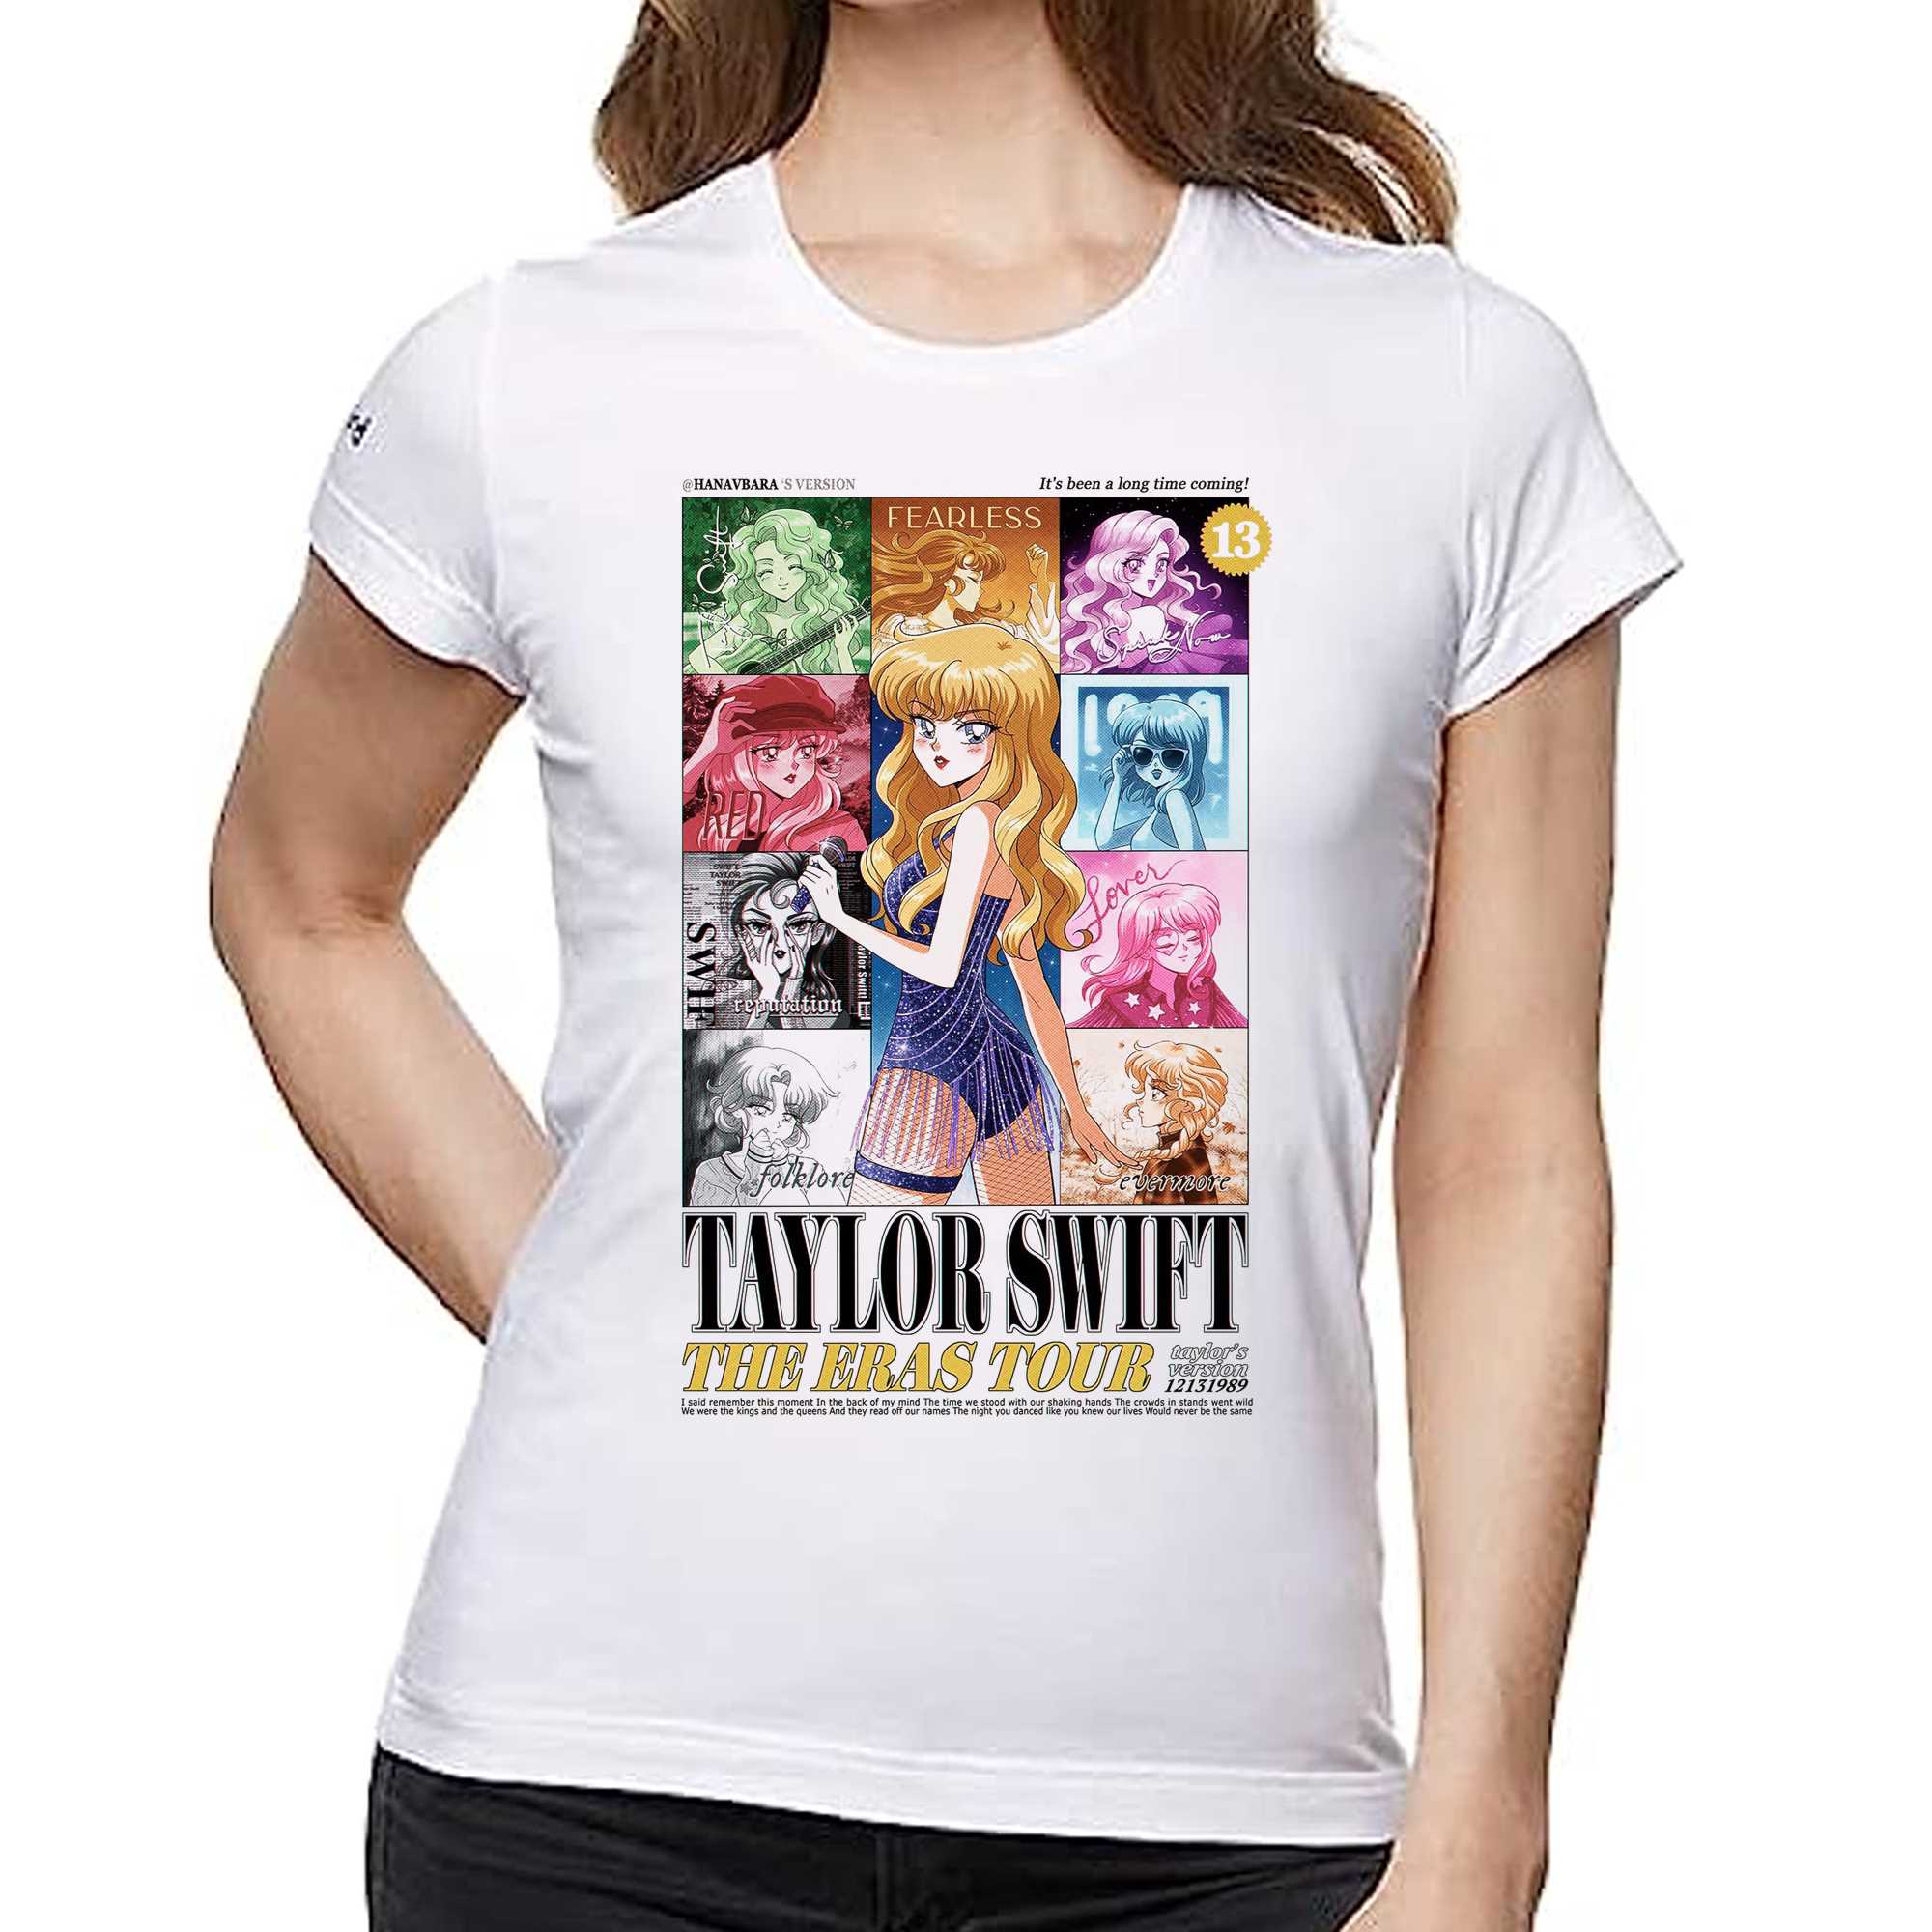 TAYLOR SWIFT~The Eras Tour~ Kids Apparel Polyester 3D T-SHIRT, Black Top~2  sided